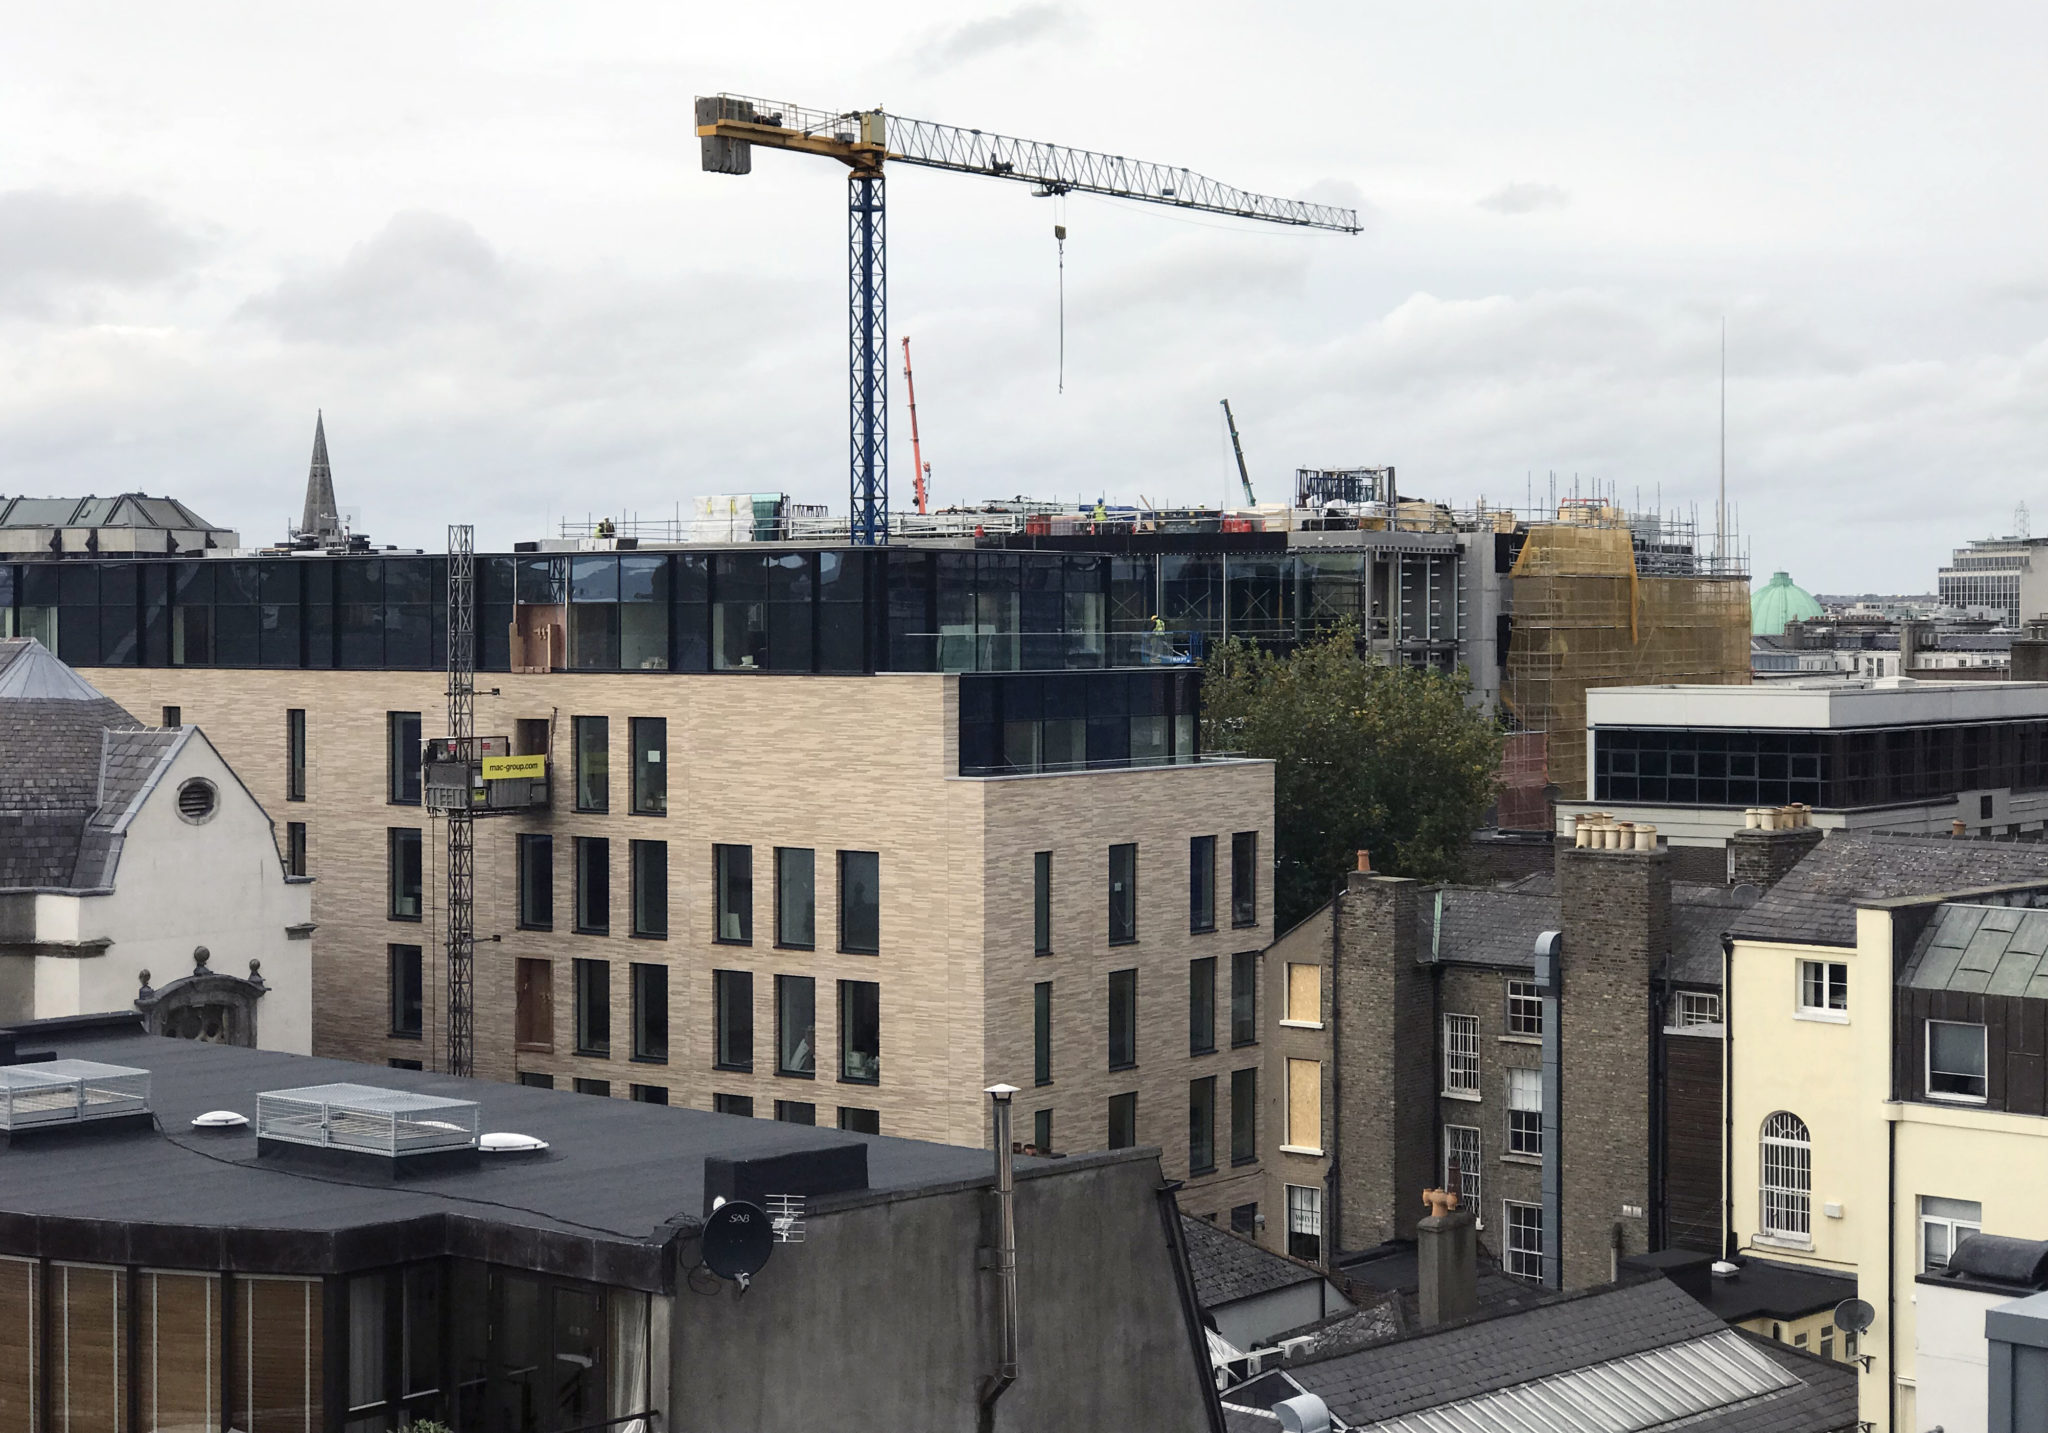 Construction cranes on a building site in Dublin.